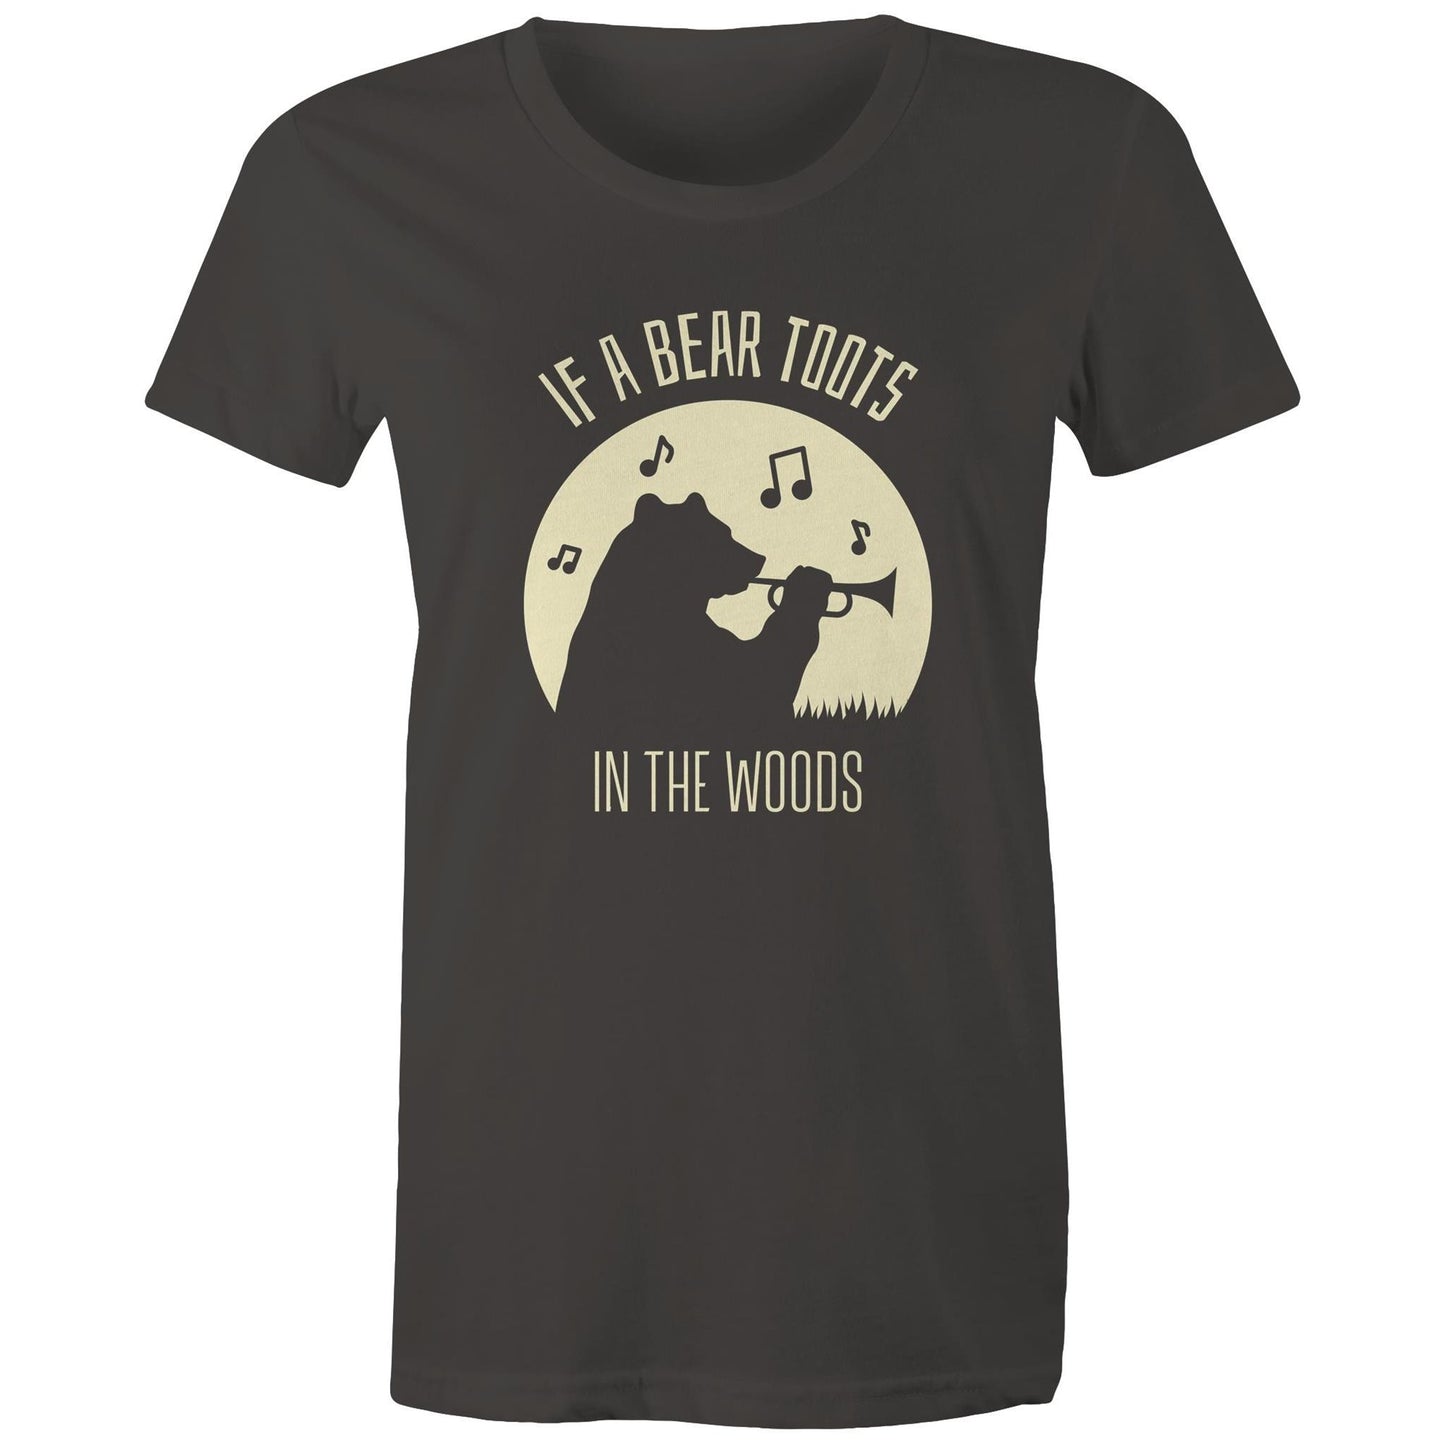 If A Bear Toots In The Woods, Trumpet Player - Womens T-shirt Charcoal Womens T-shirt animal Music